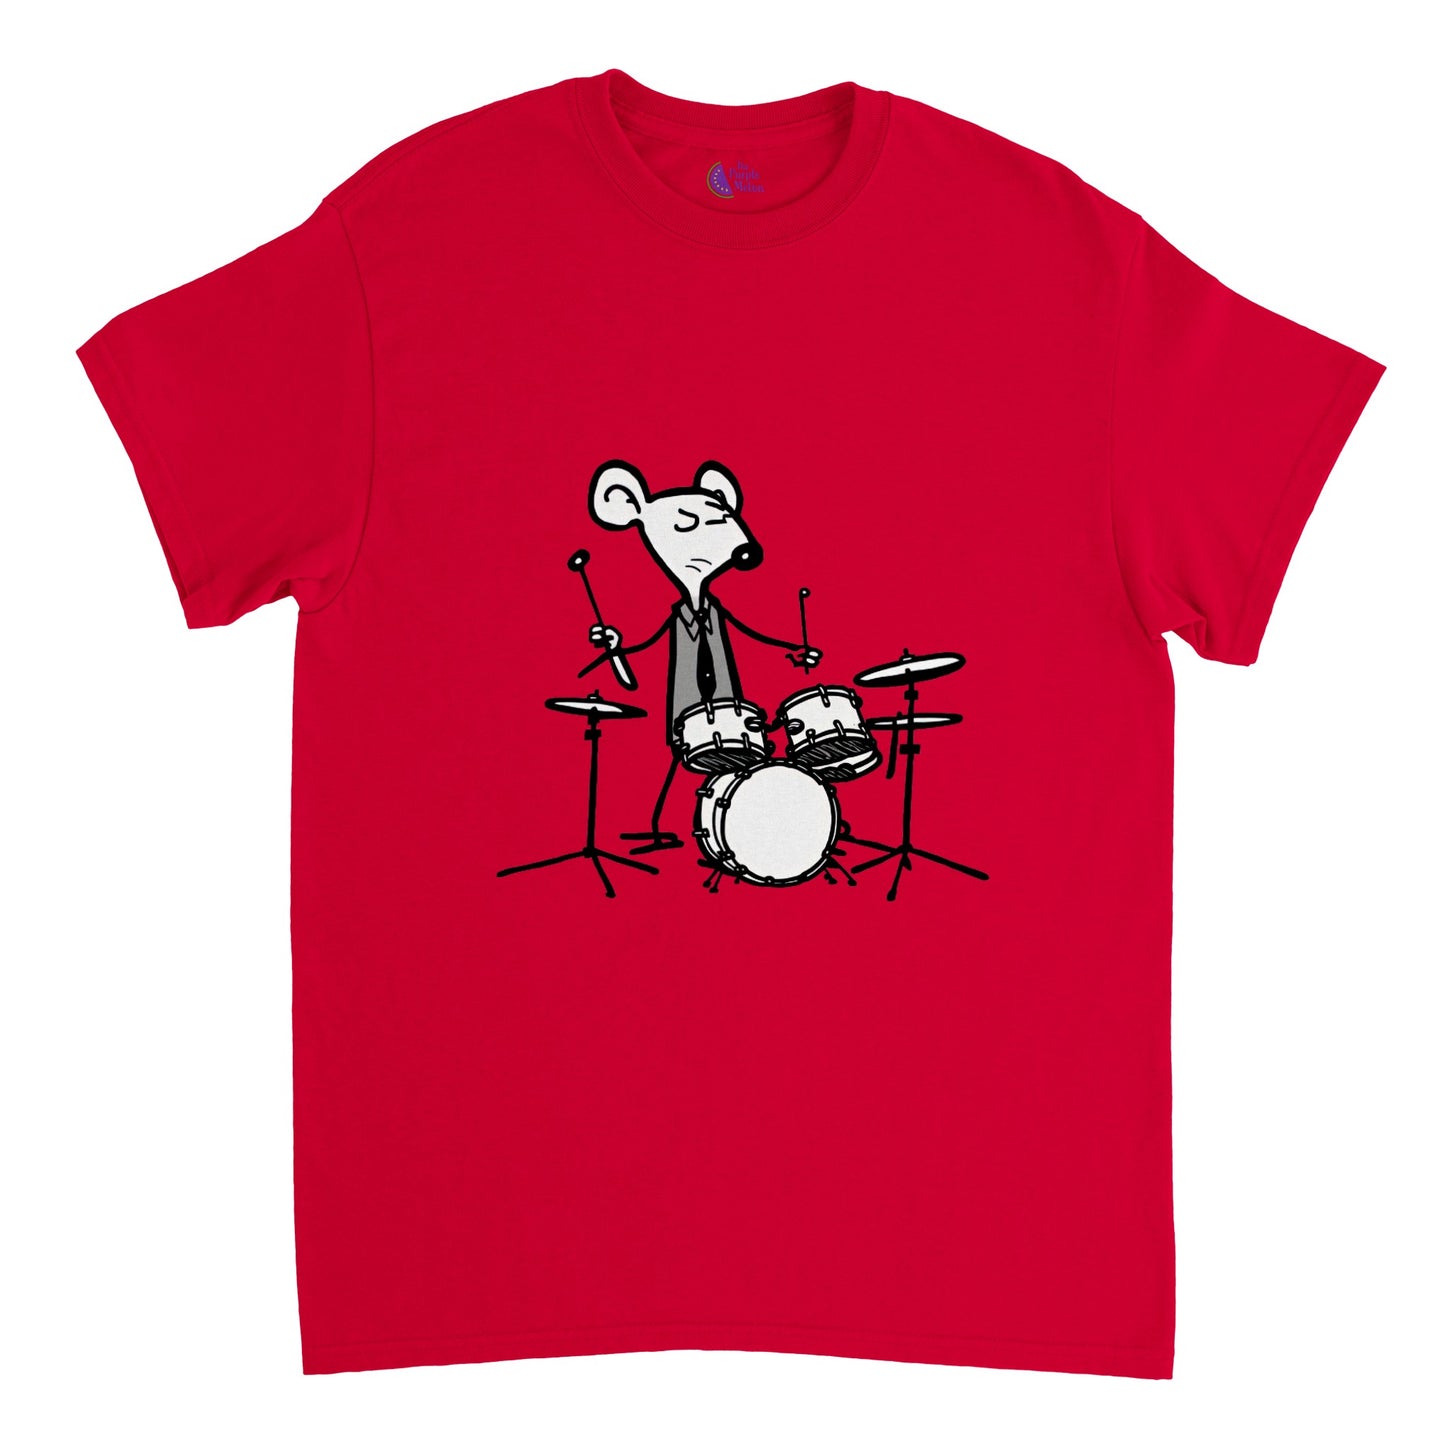 red t-shirt with a mouse playing drums print